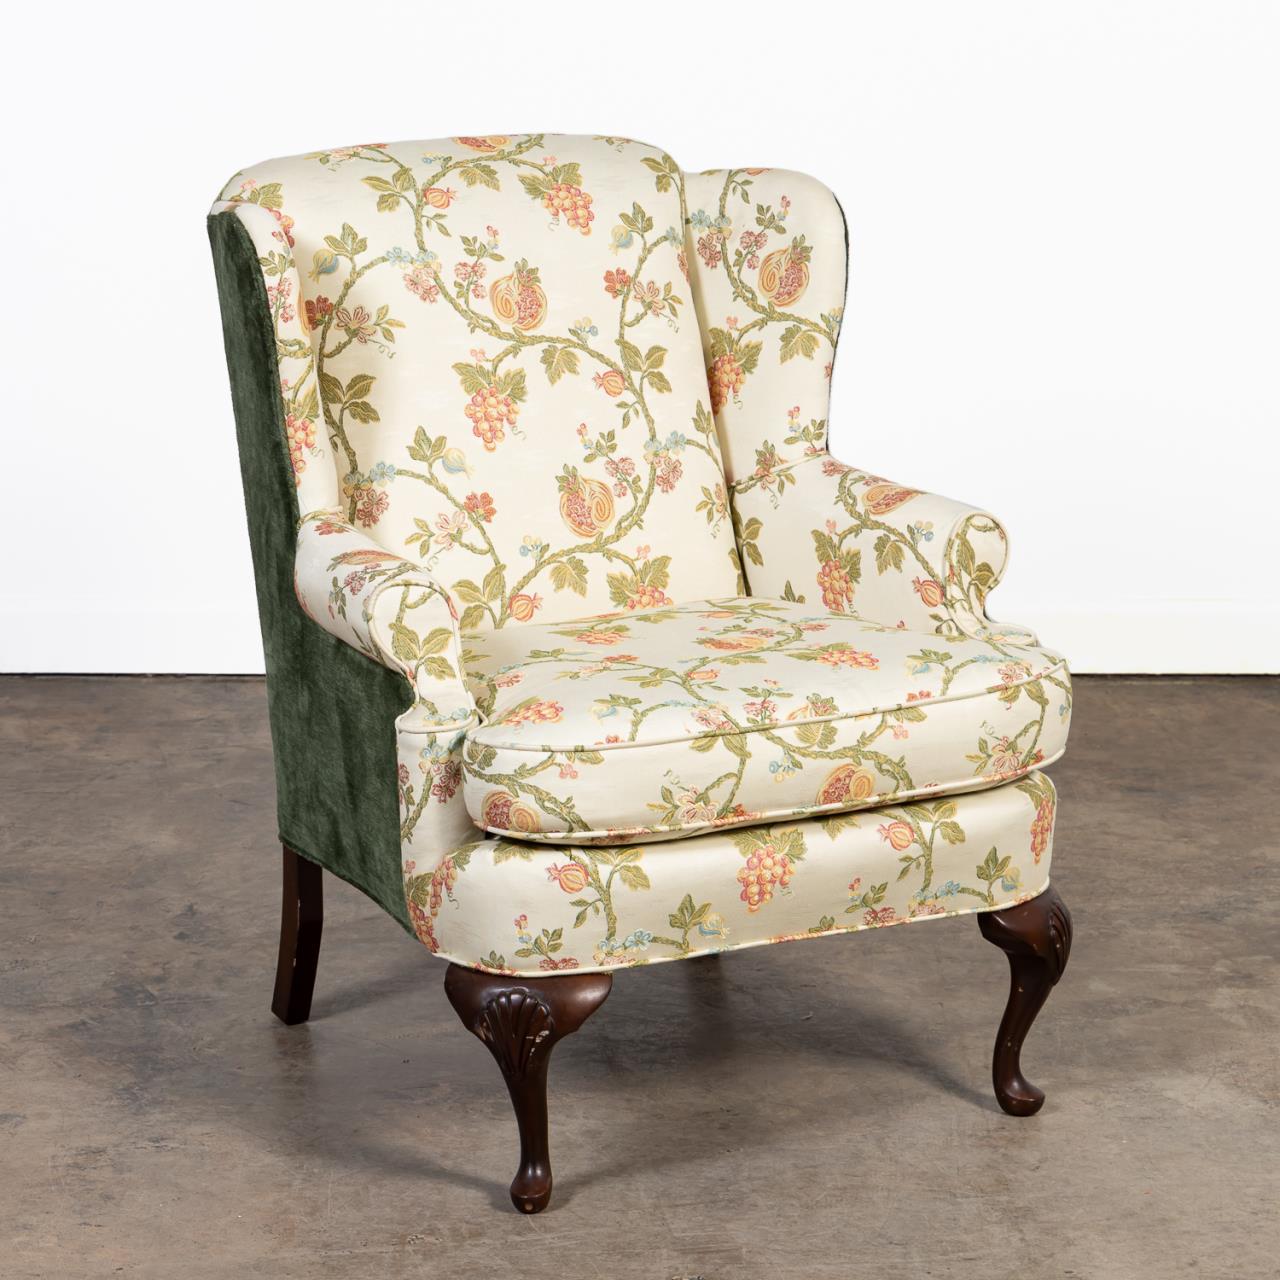 QUEEN ANNE STYLE WINGBACK FRUIT 359657